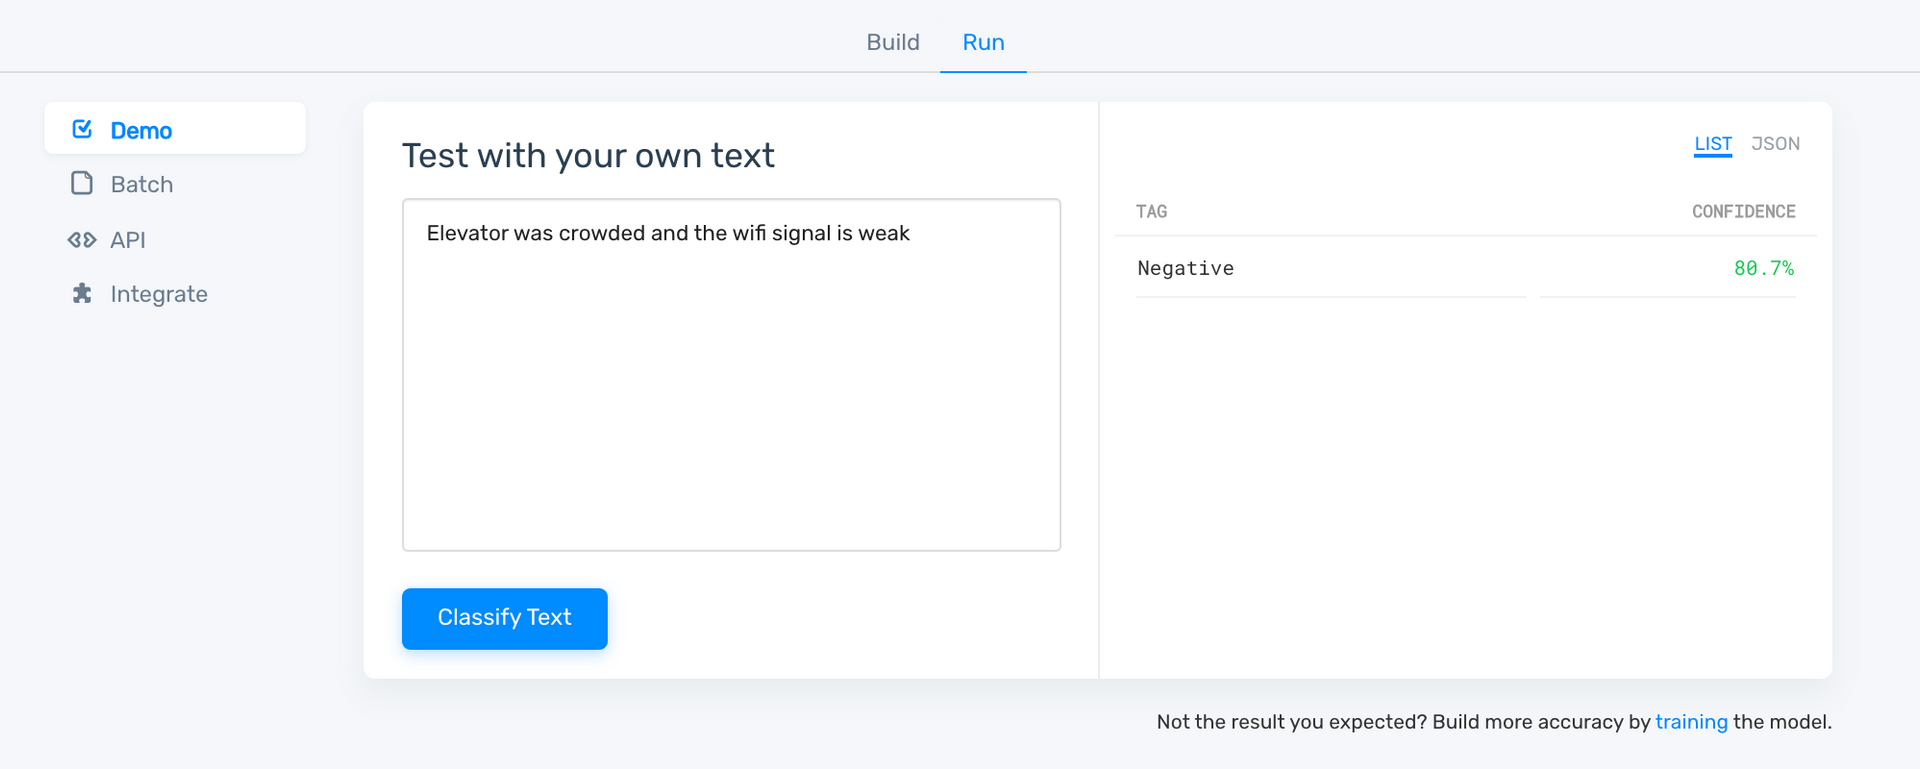 A user testing the classifier by entering text and clicking on classify text